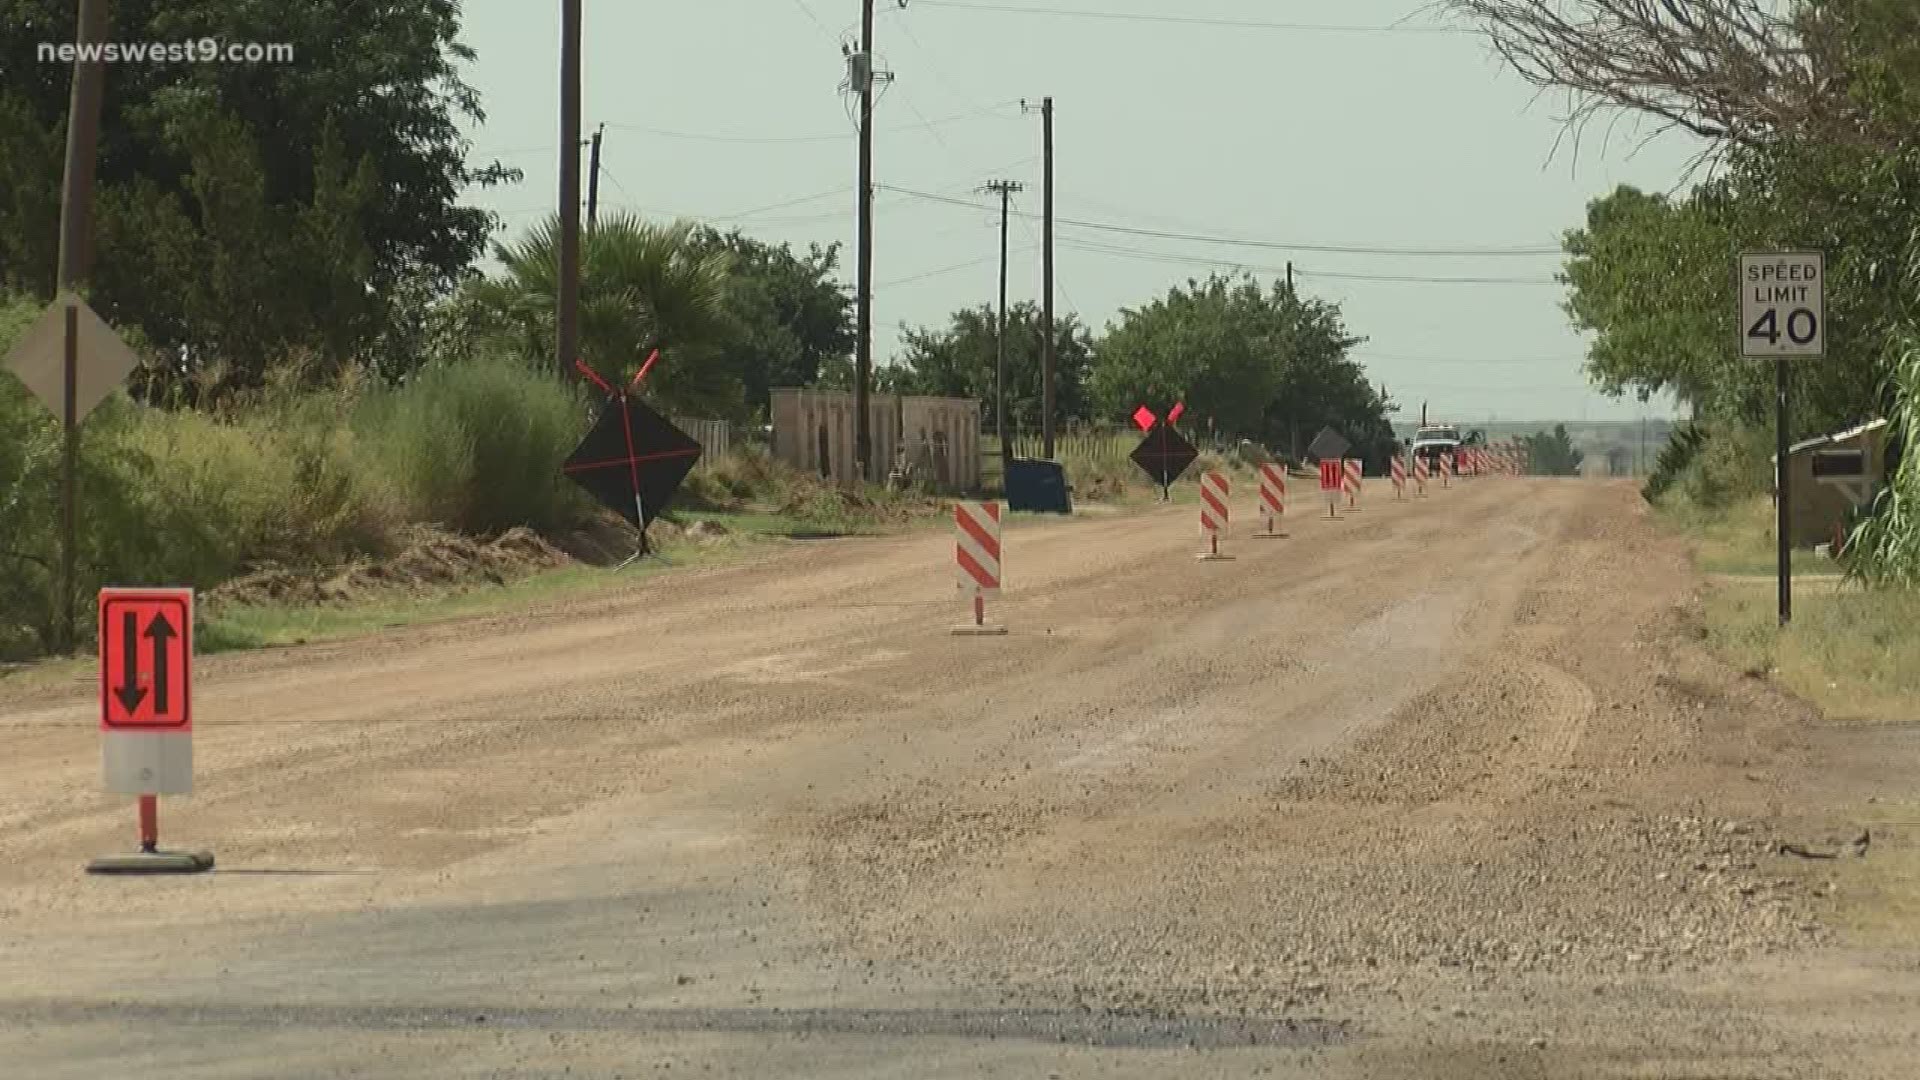 Officials say construction will take four to six months to complete, so prepare for alternate routes until December or February.